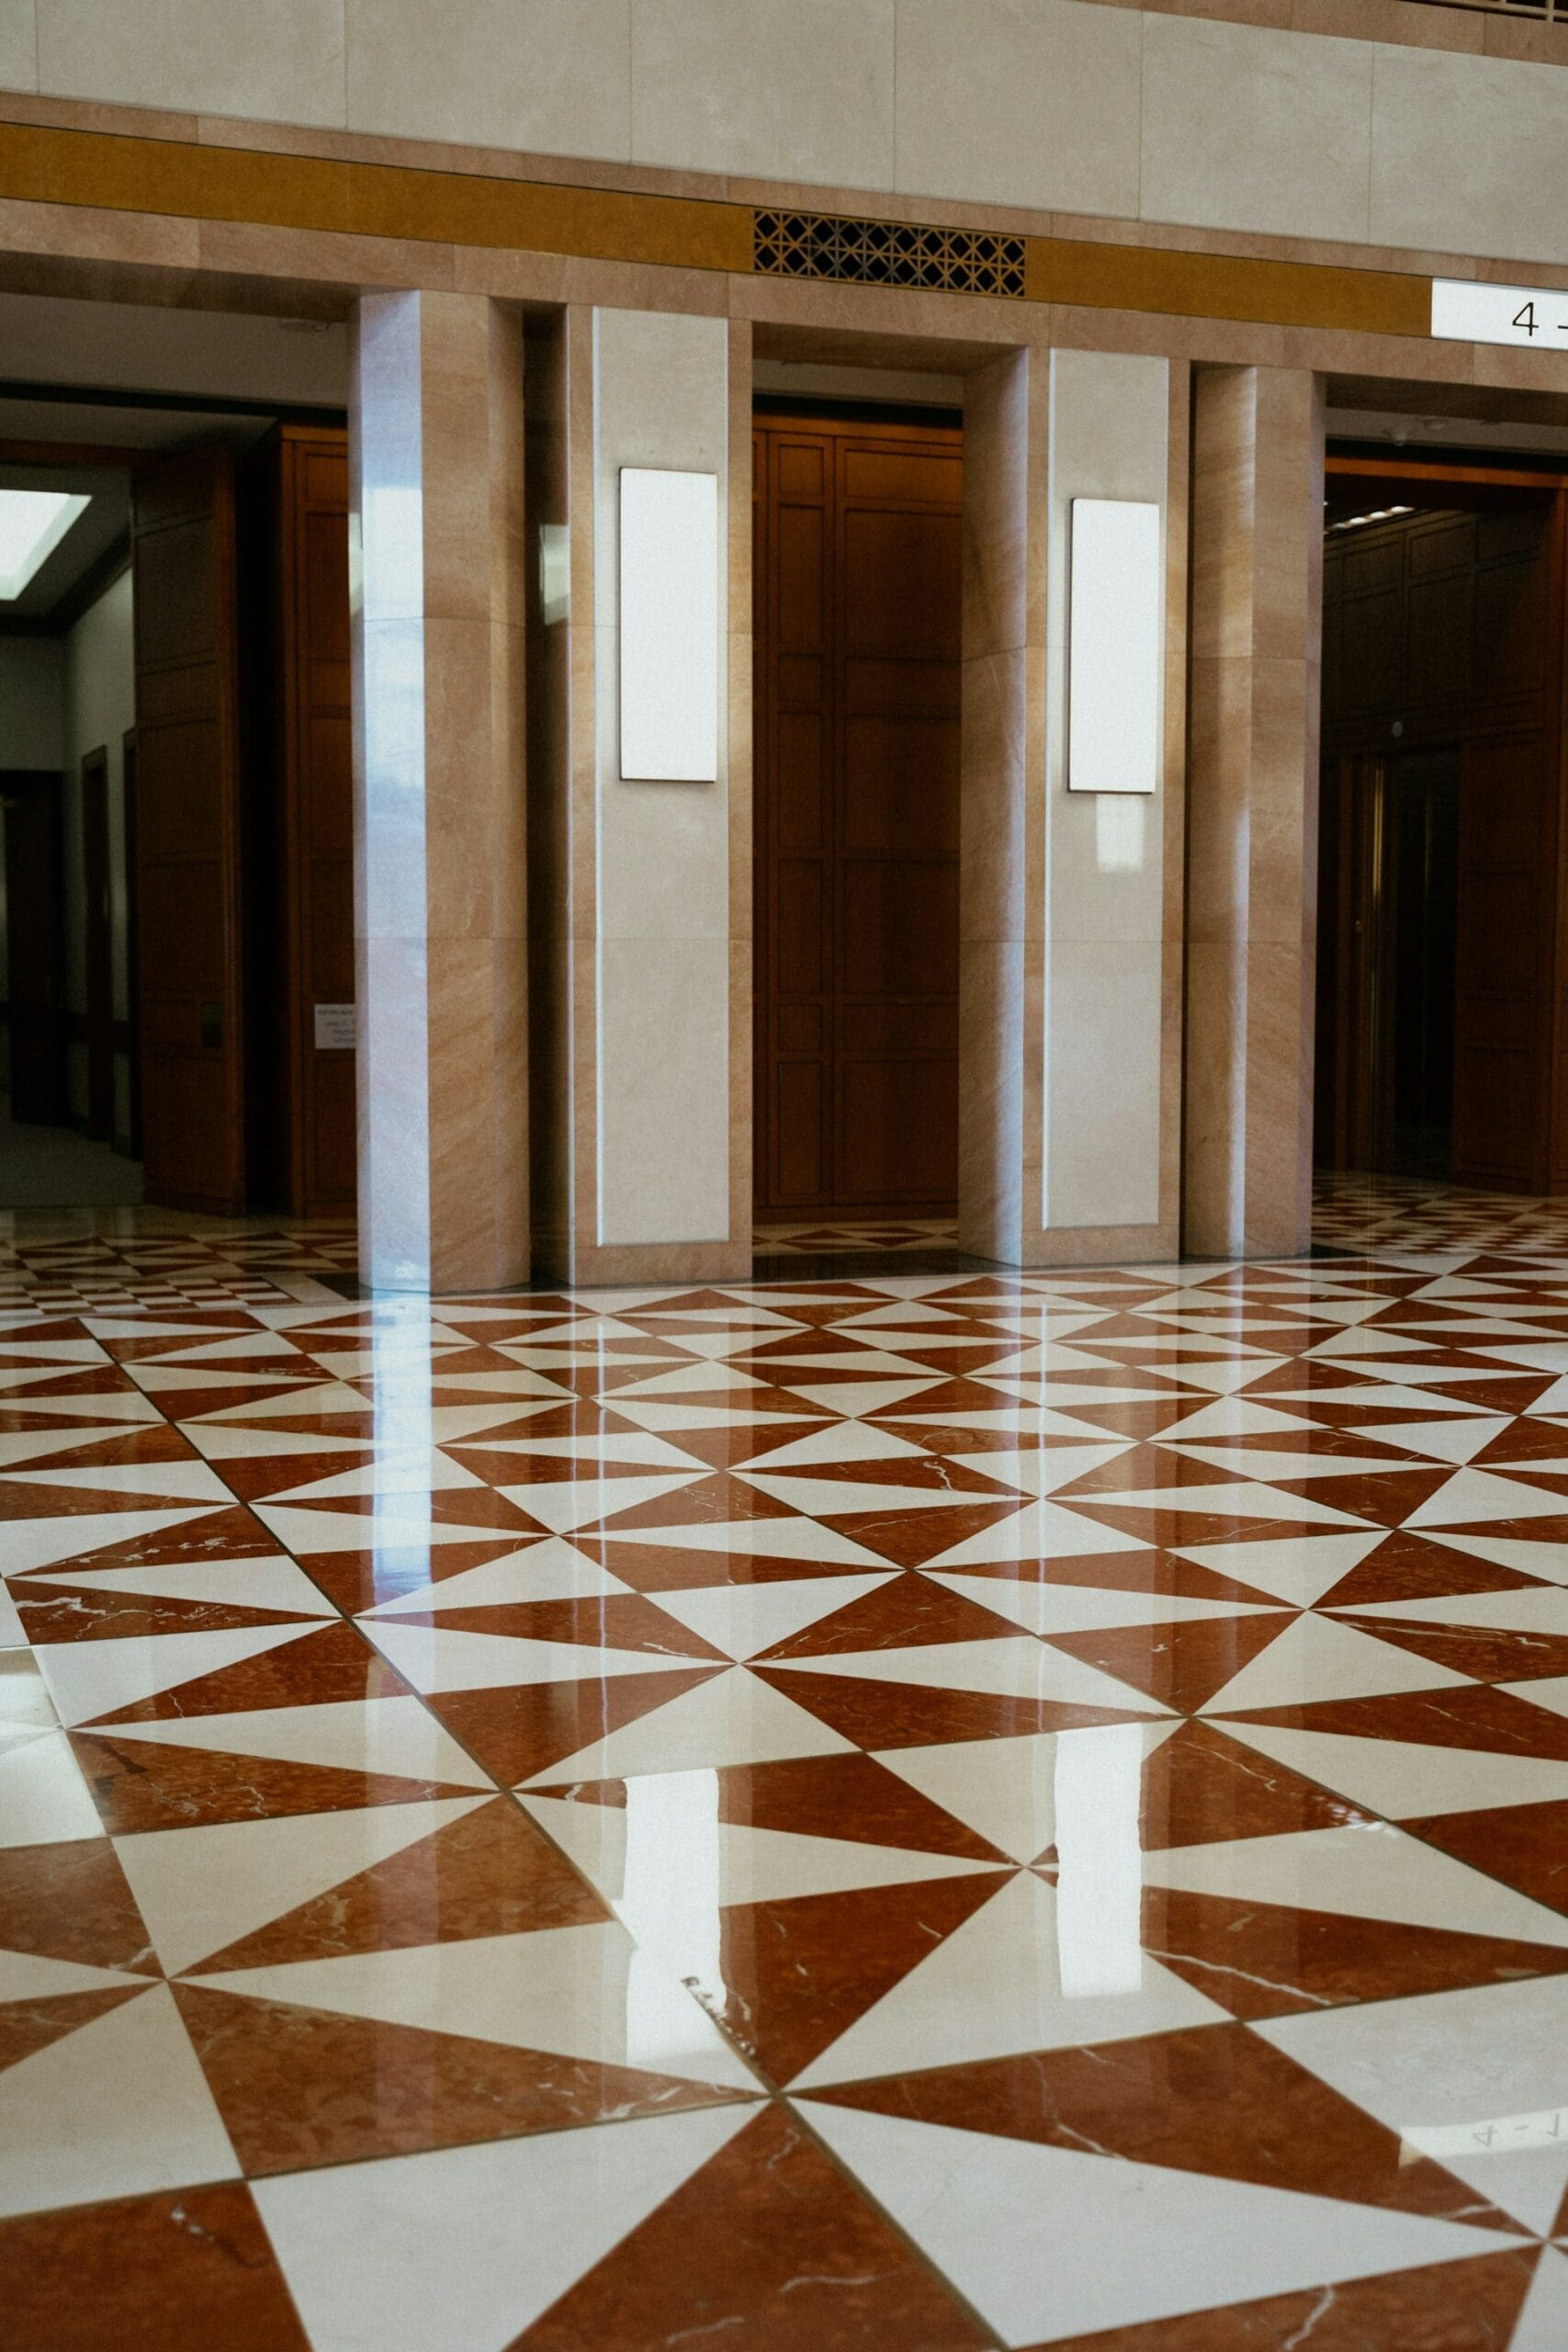 Investing in Quality: The Importance of Professional Flooring Experts